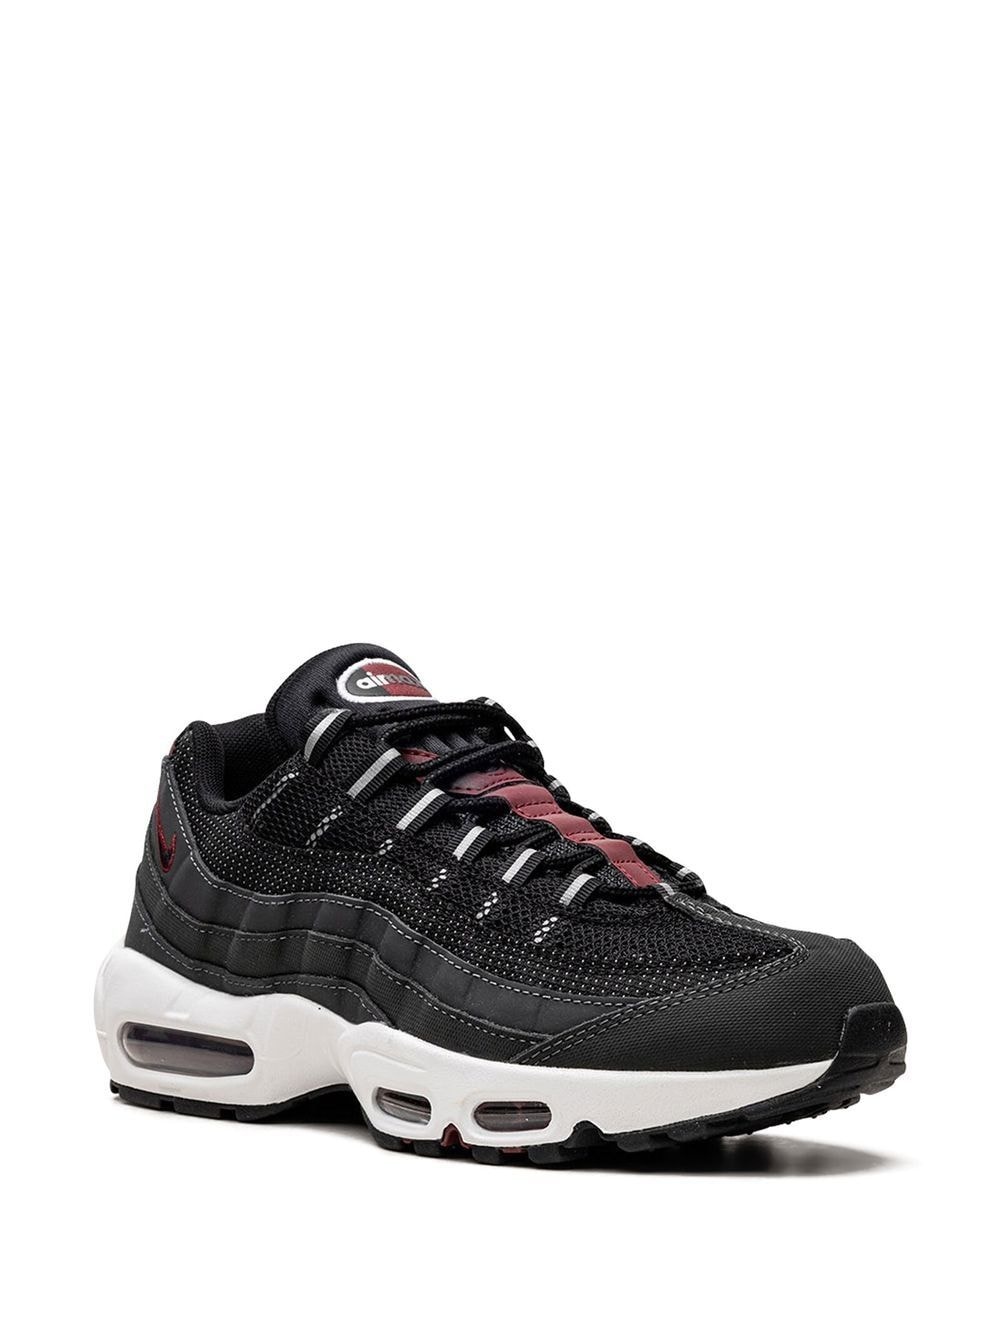 Air Max 95 "Anthracite/Team Red/Summit White" sneakers - 2